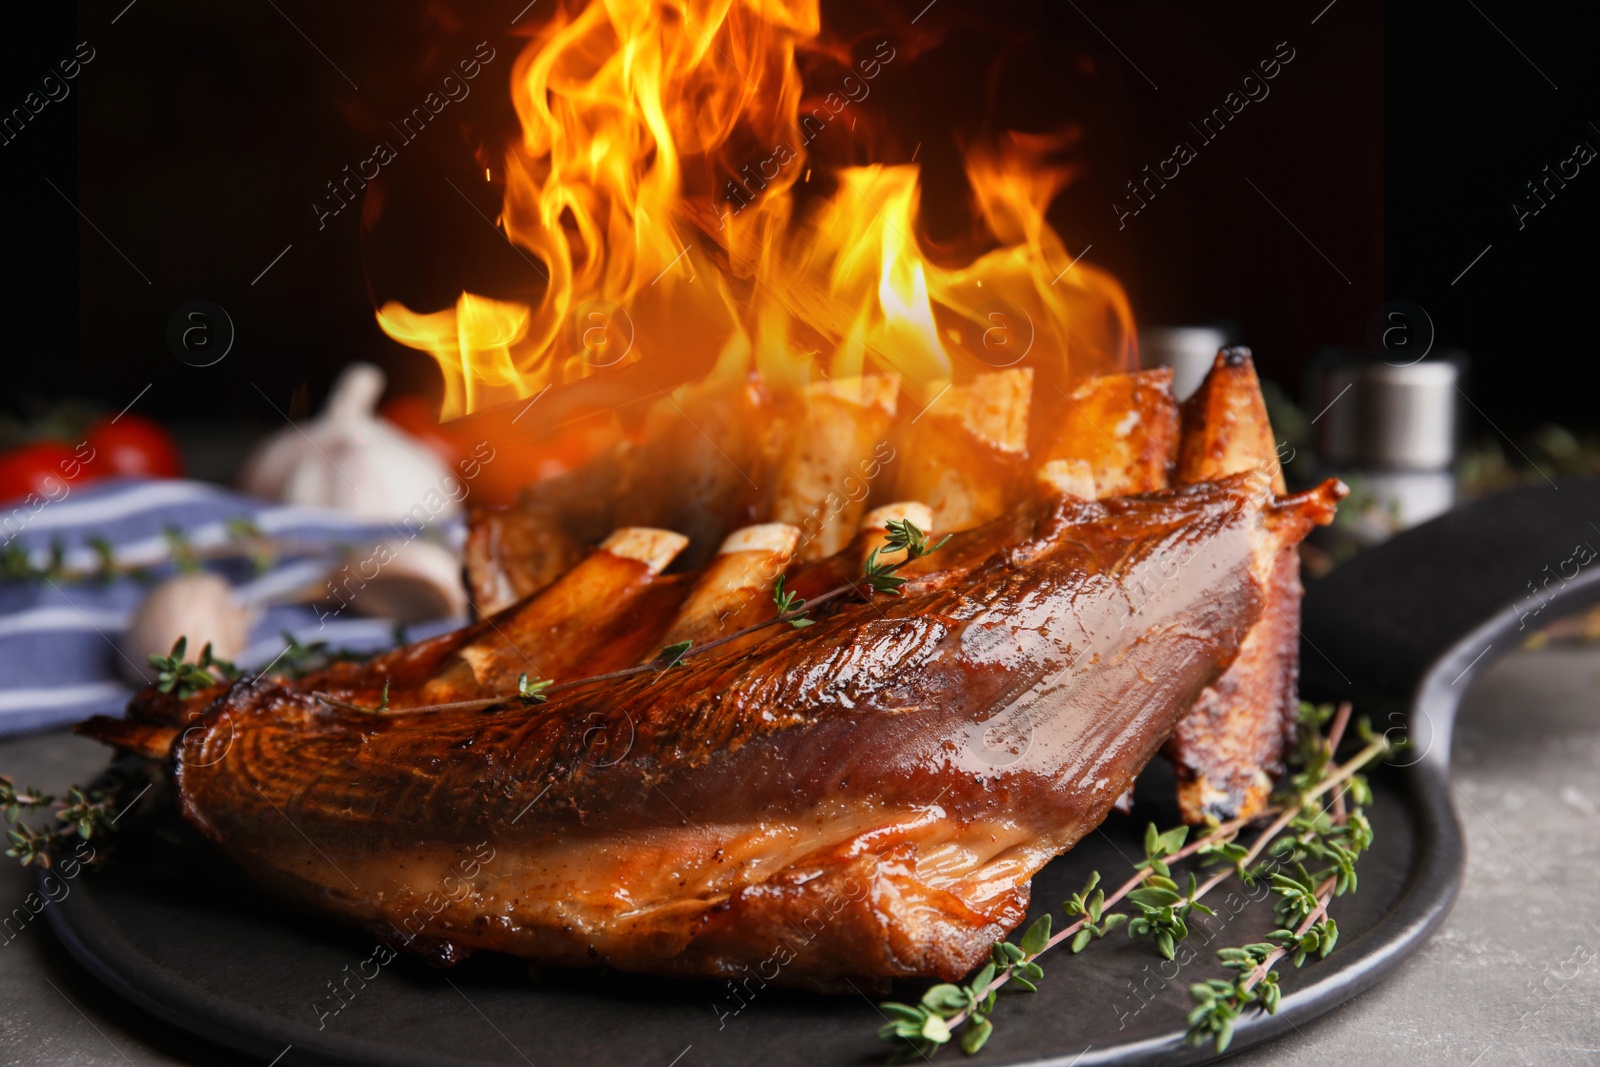 Image of Delicious roasted ribs with flame on table